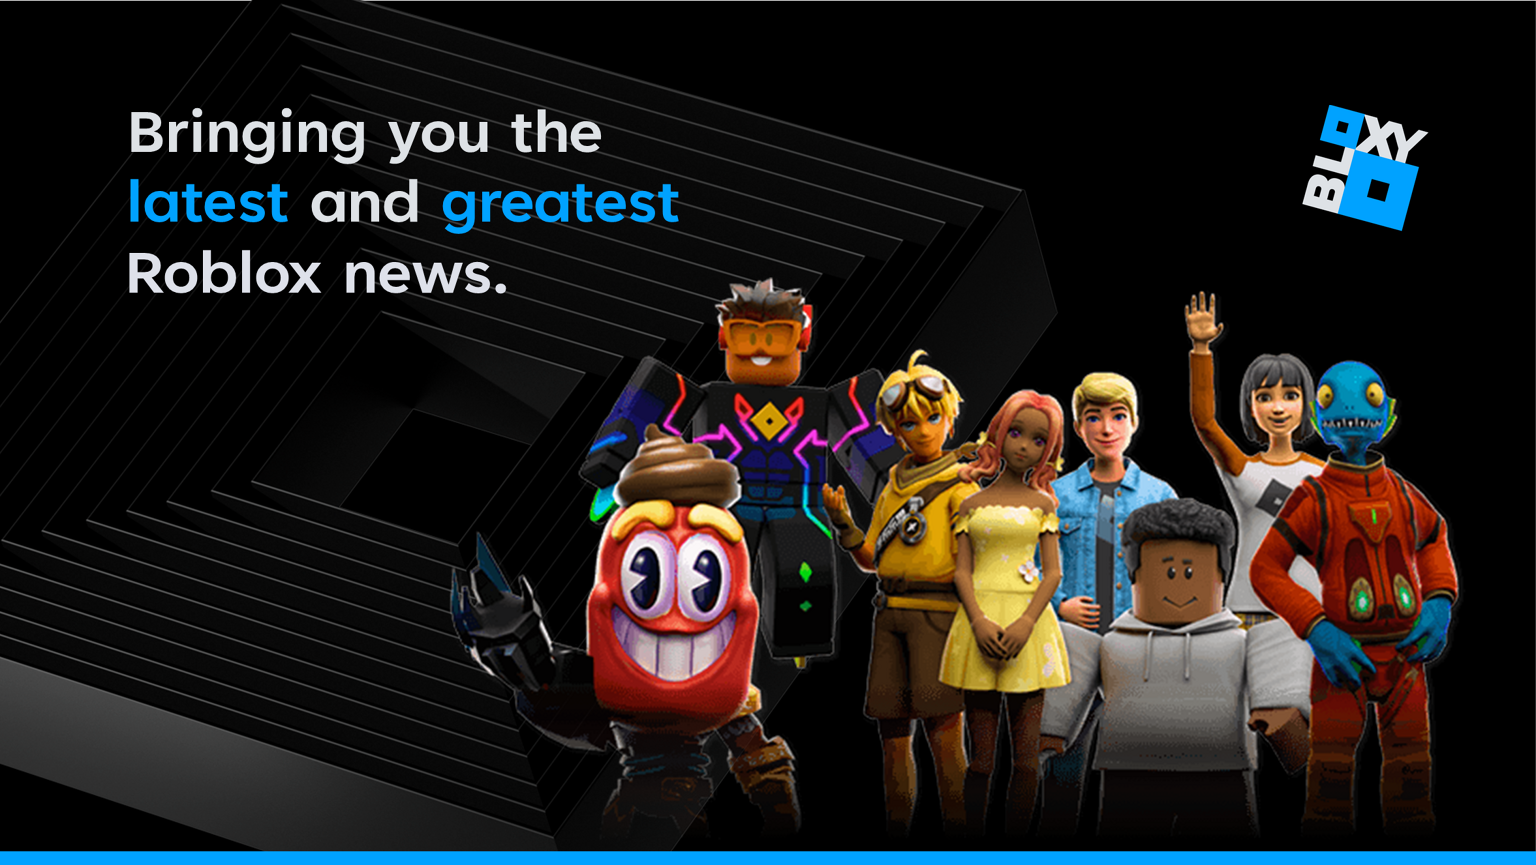 Bloxy News on X: The perfect gift for any #Roblox fan. 🍂 Every